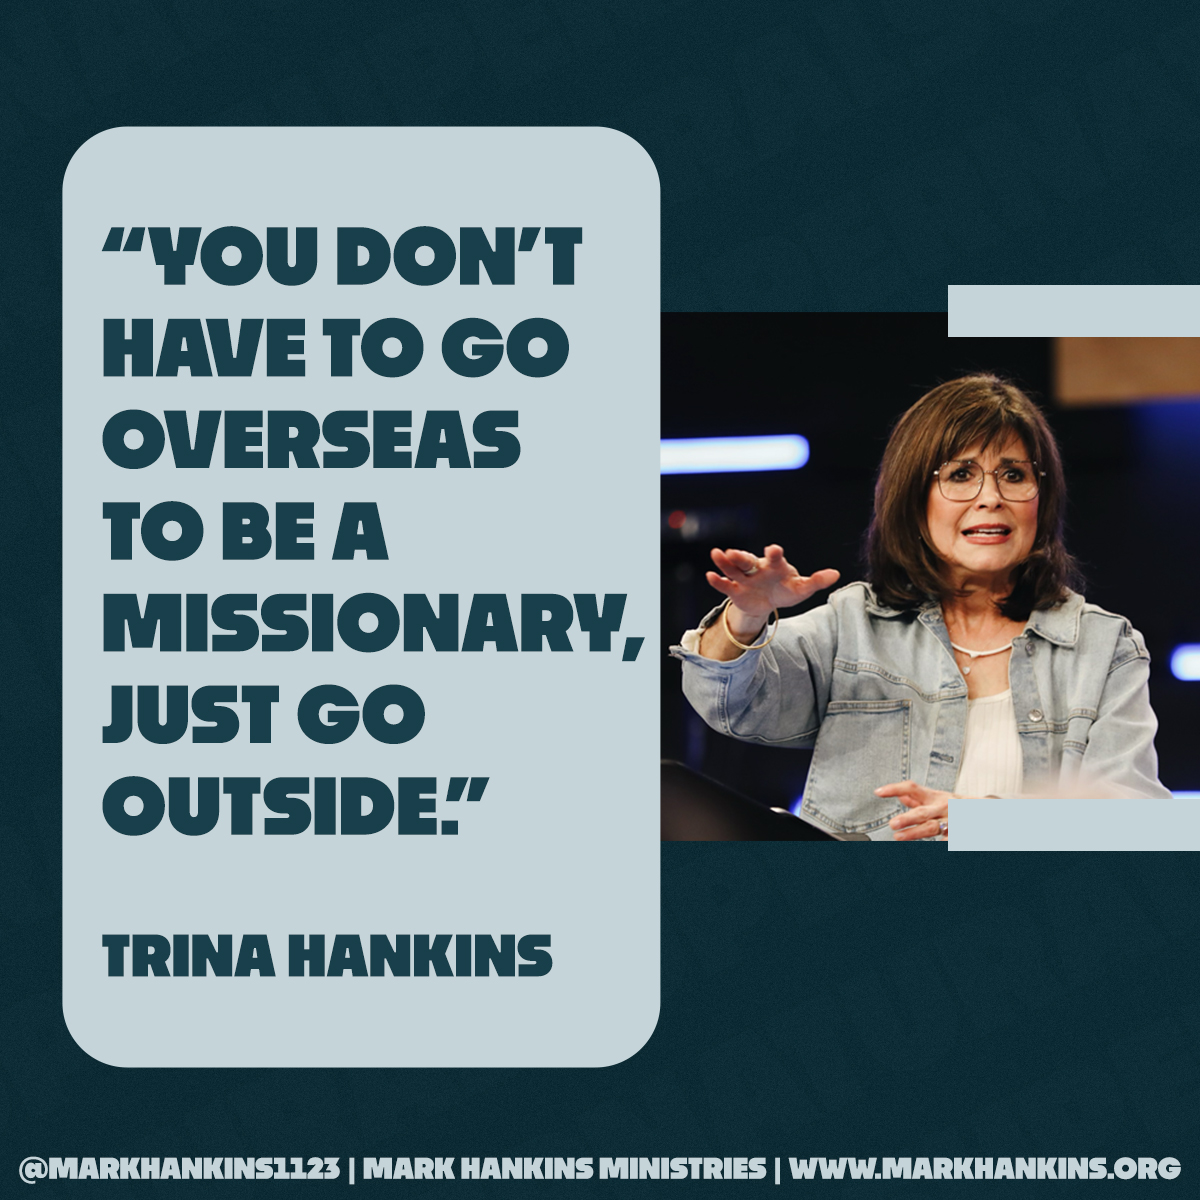 “YOU DON’T HAVE TO GO OVERSEAS TO BE A MISSIONARy, jUST GO OUTSIDE.” Trina Hankins #SLC24